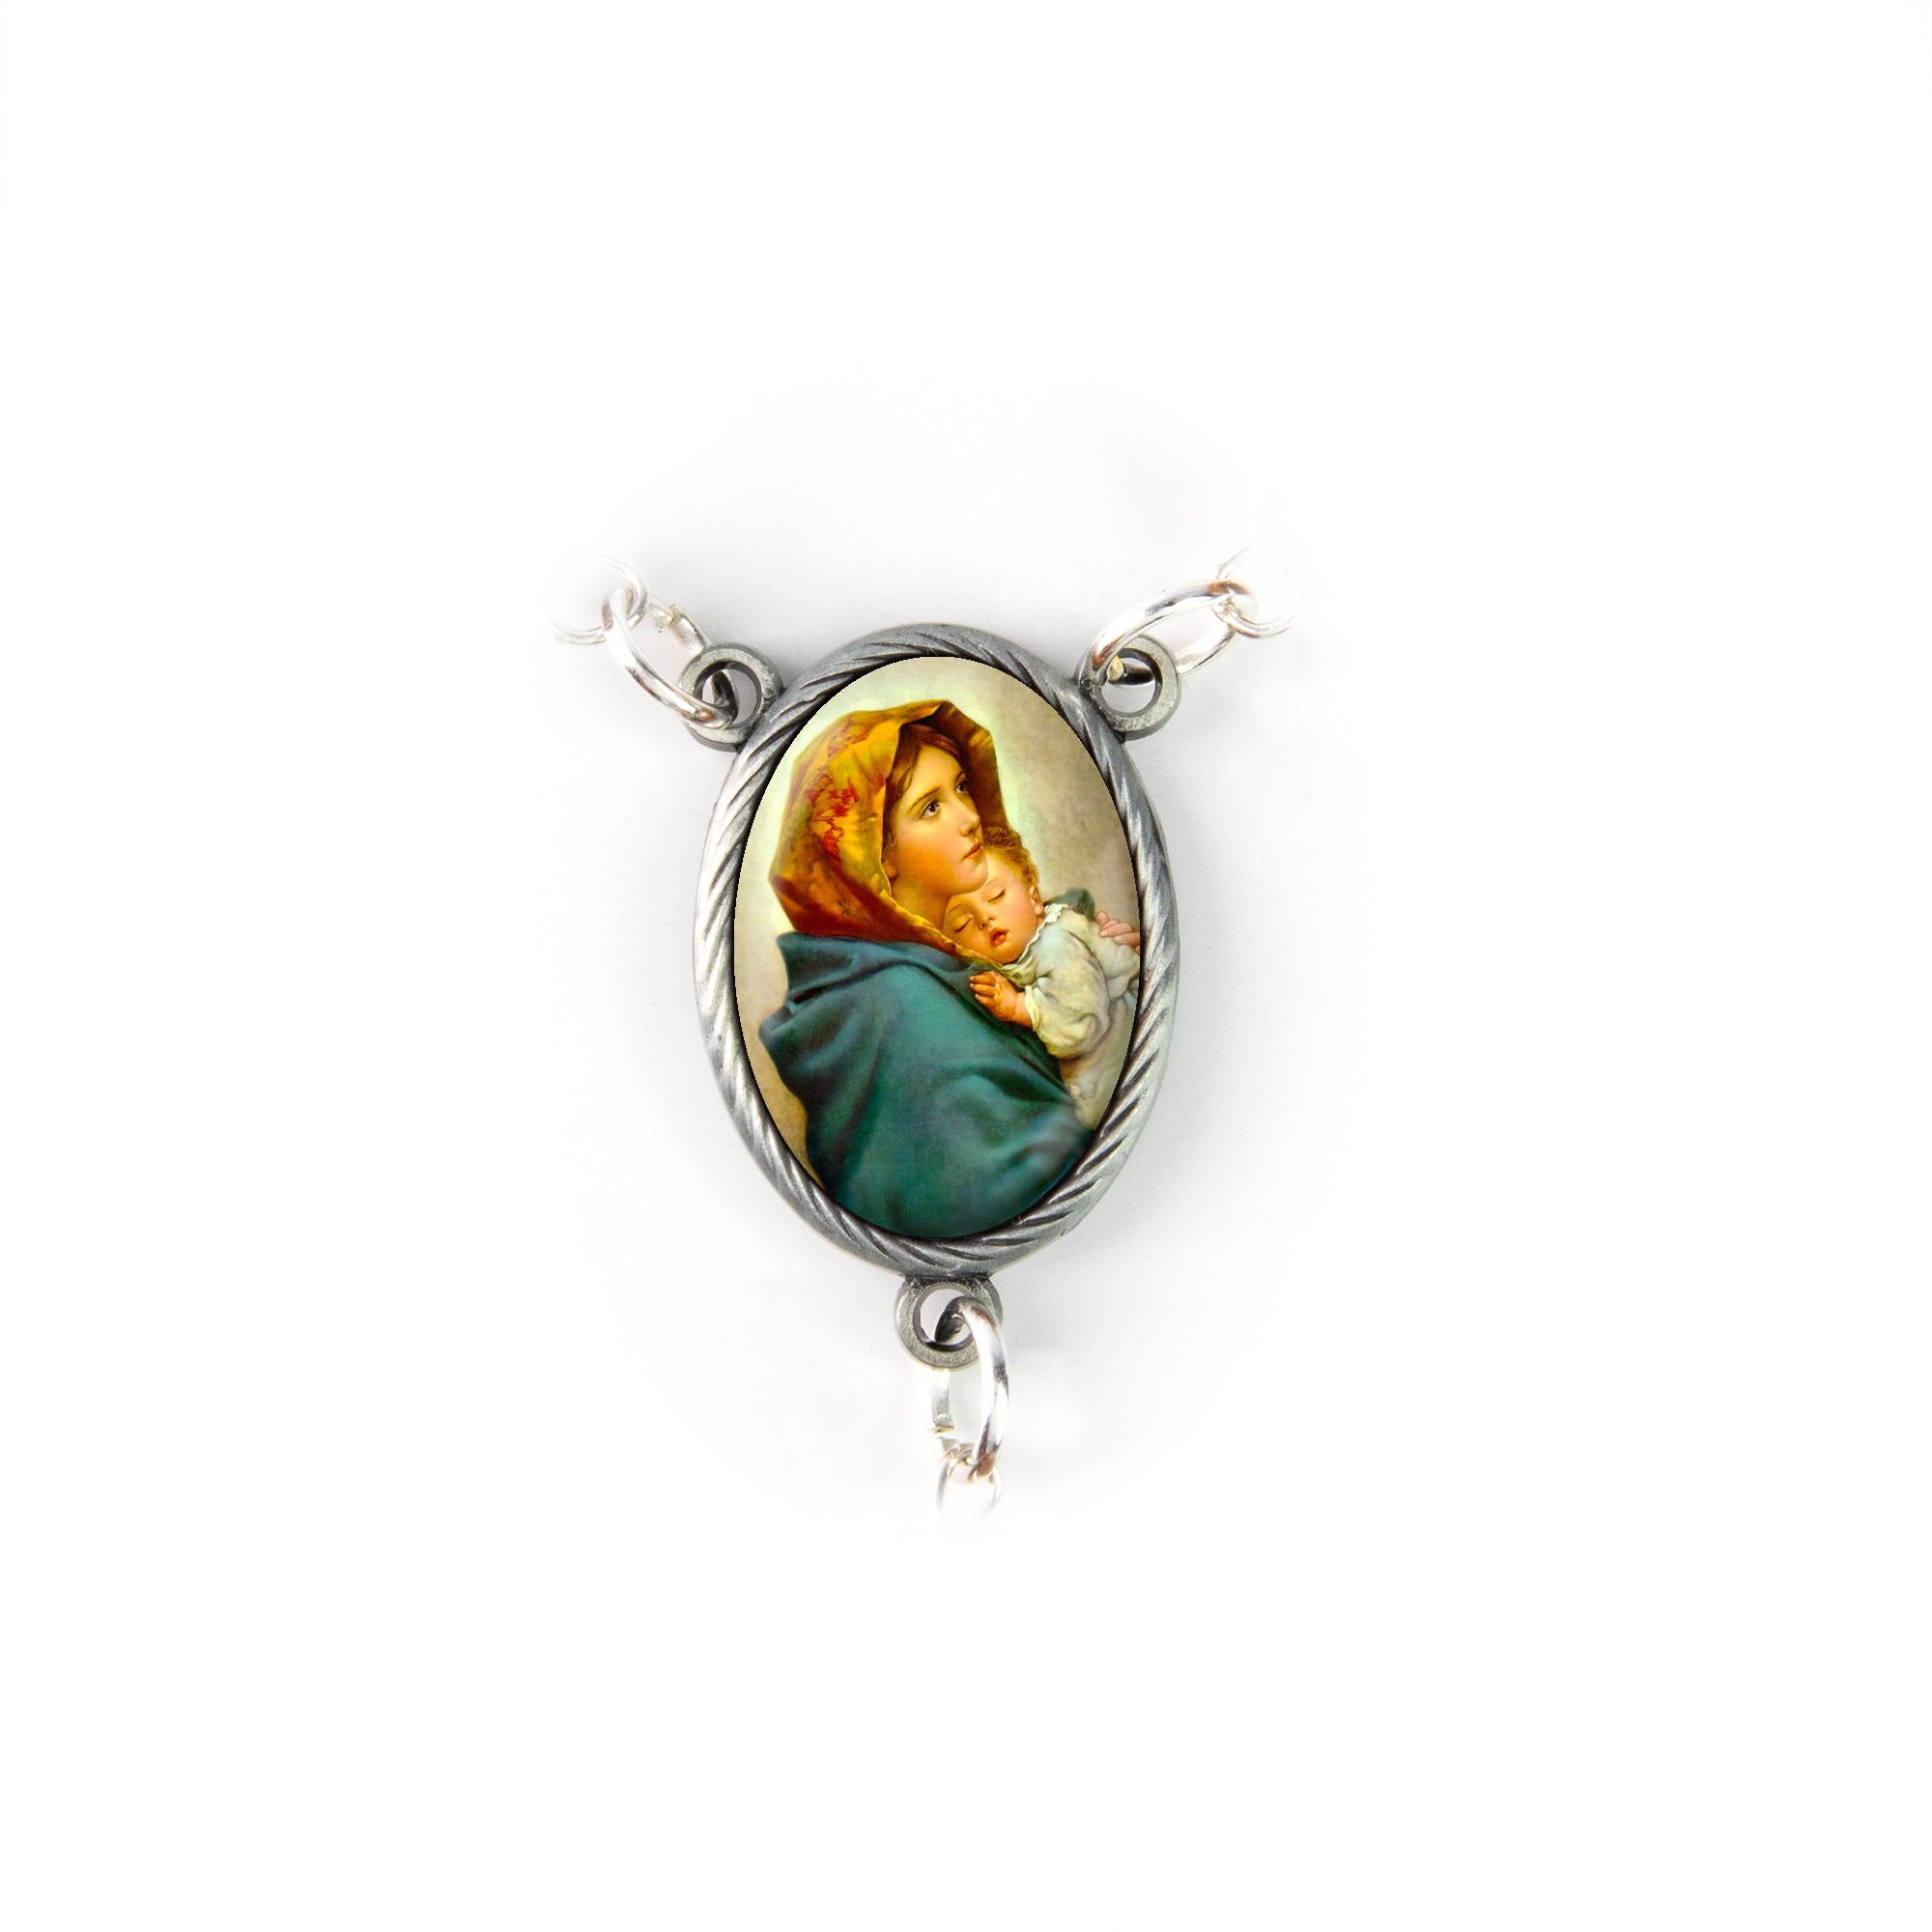 Mother of Pearl Catholic Rosary, Mother Mary and Child Jesus Medal